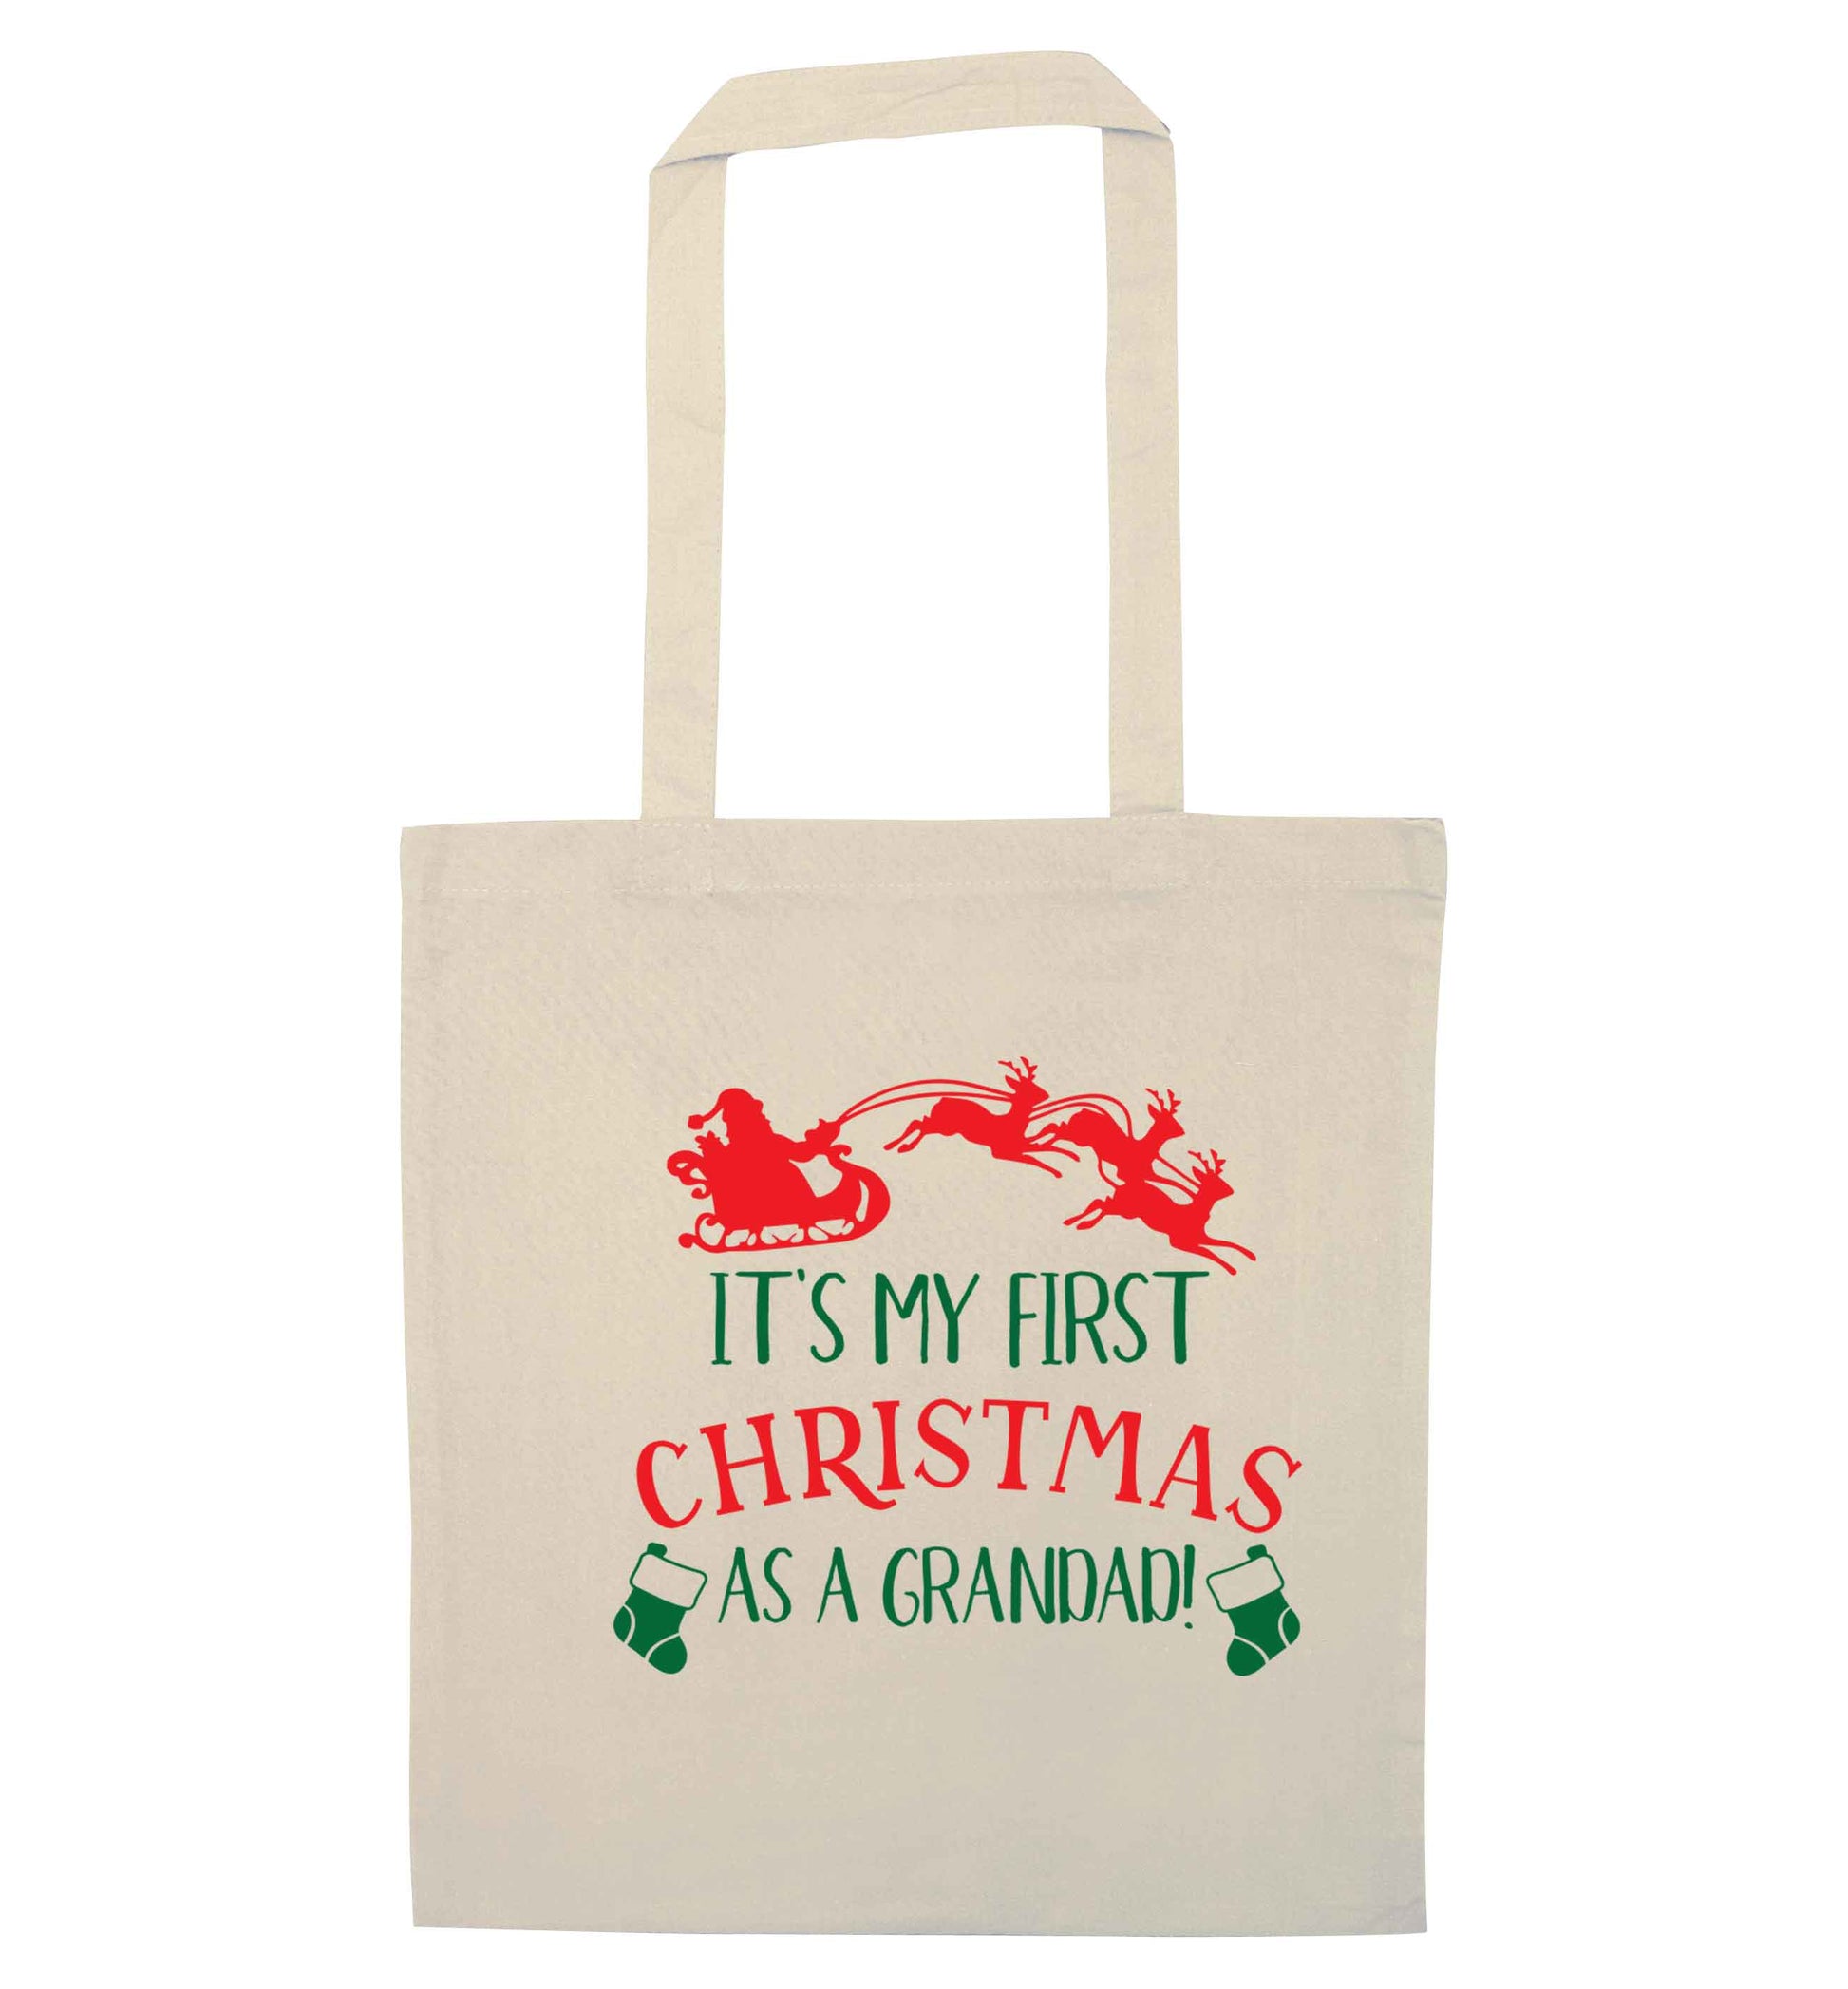 It's my first Christmas as a grandad! natural tote bag